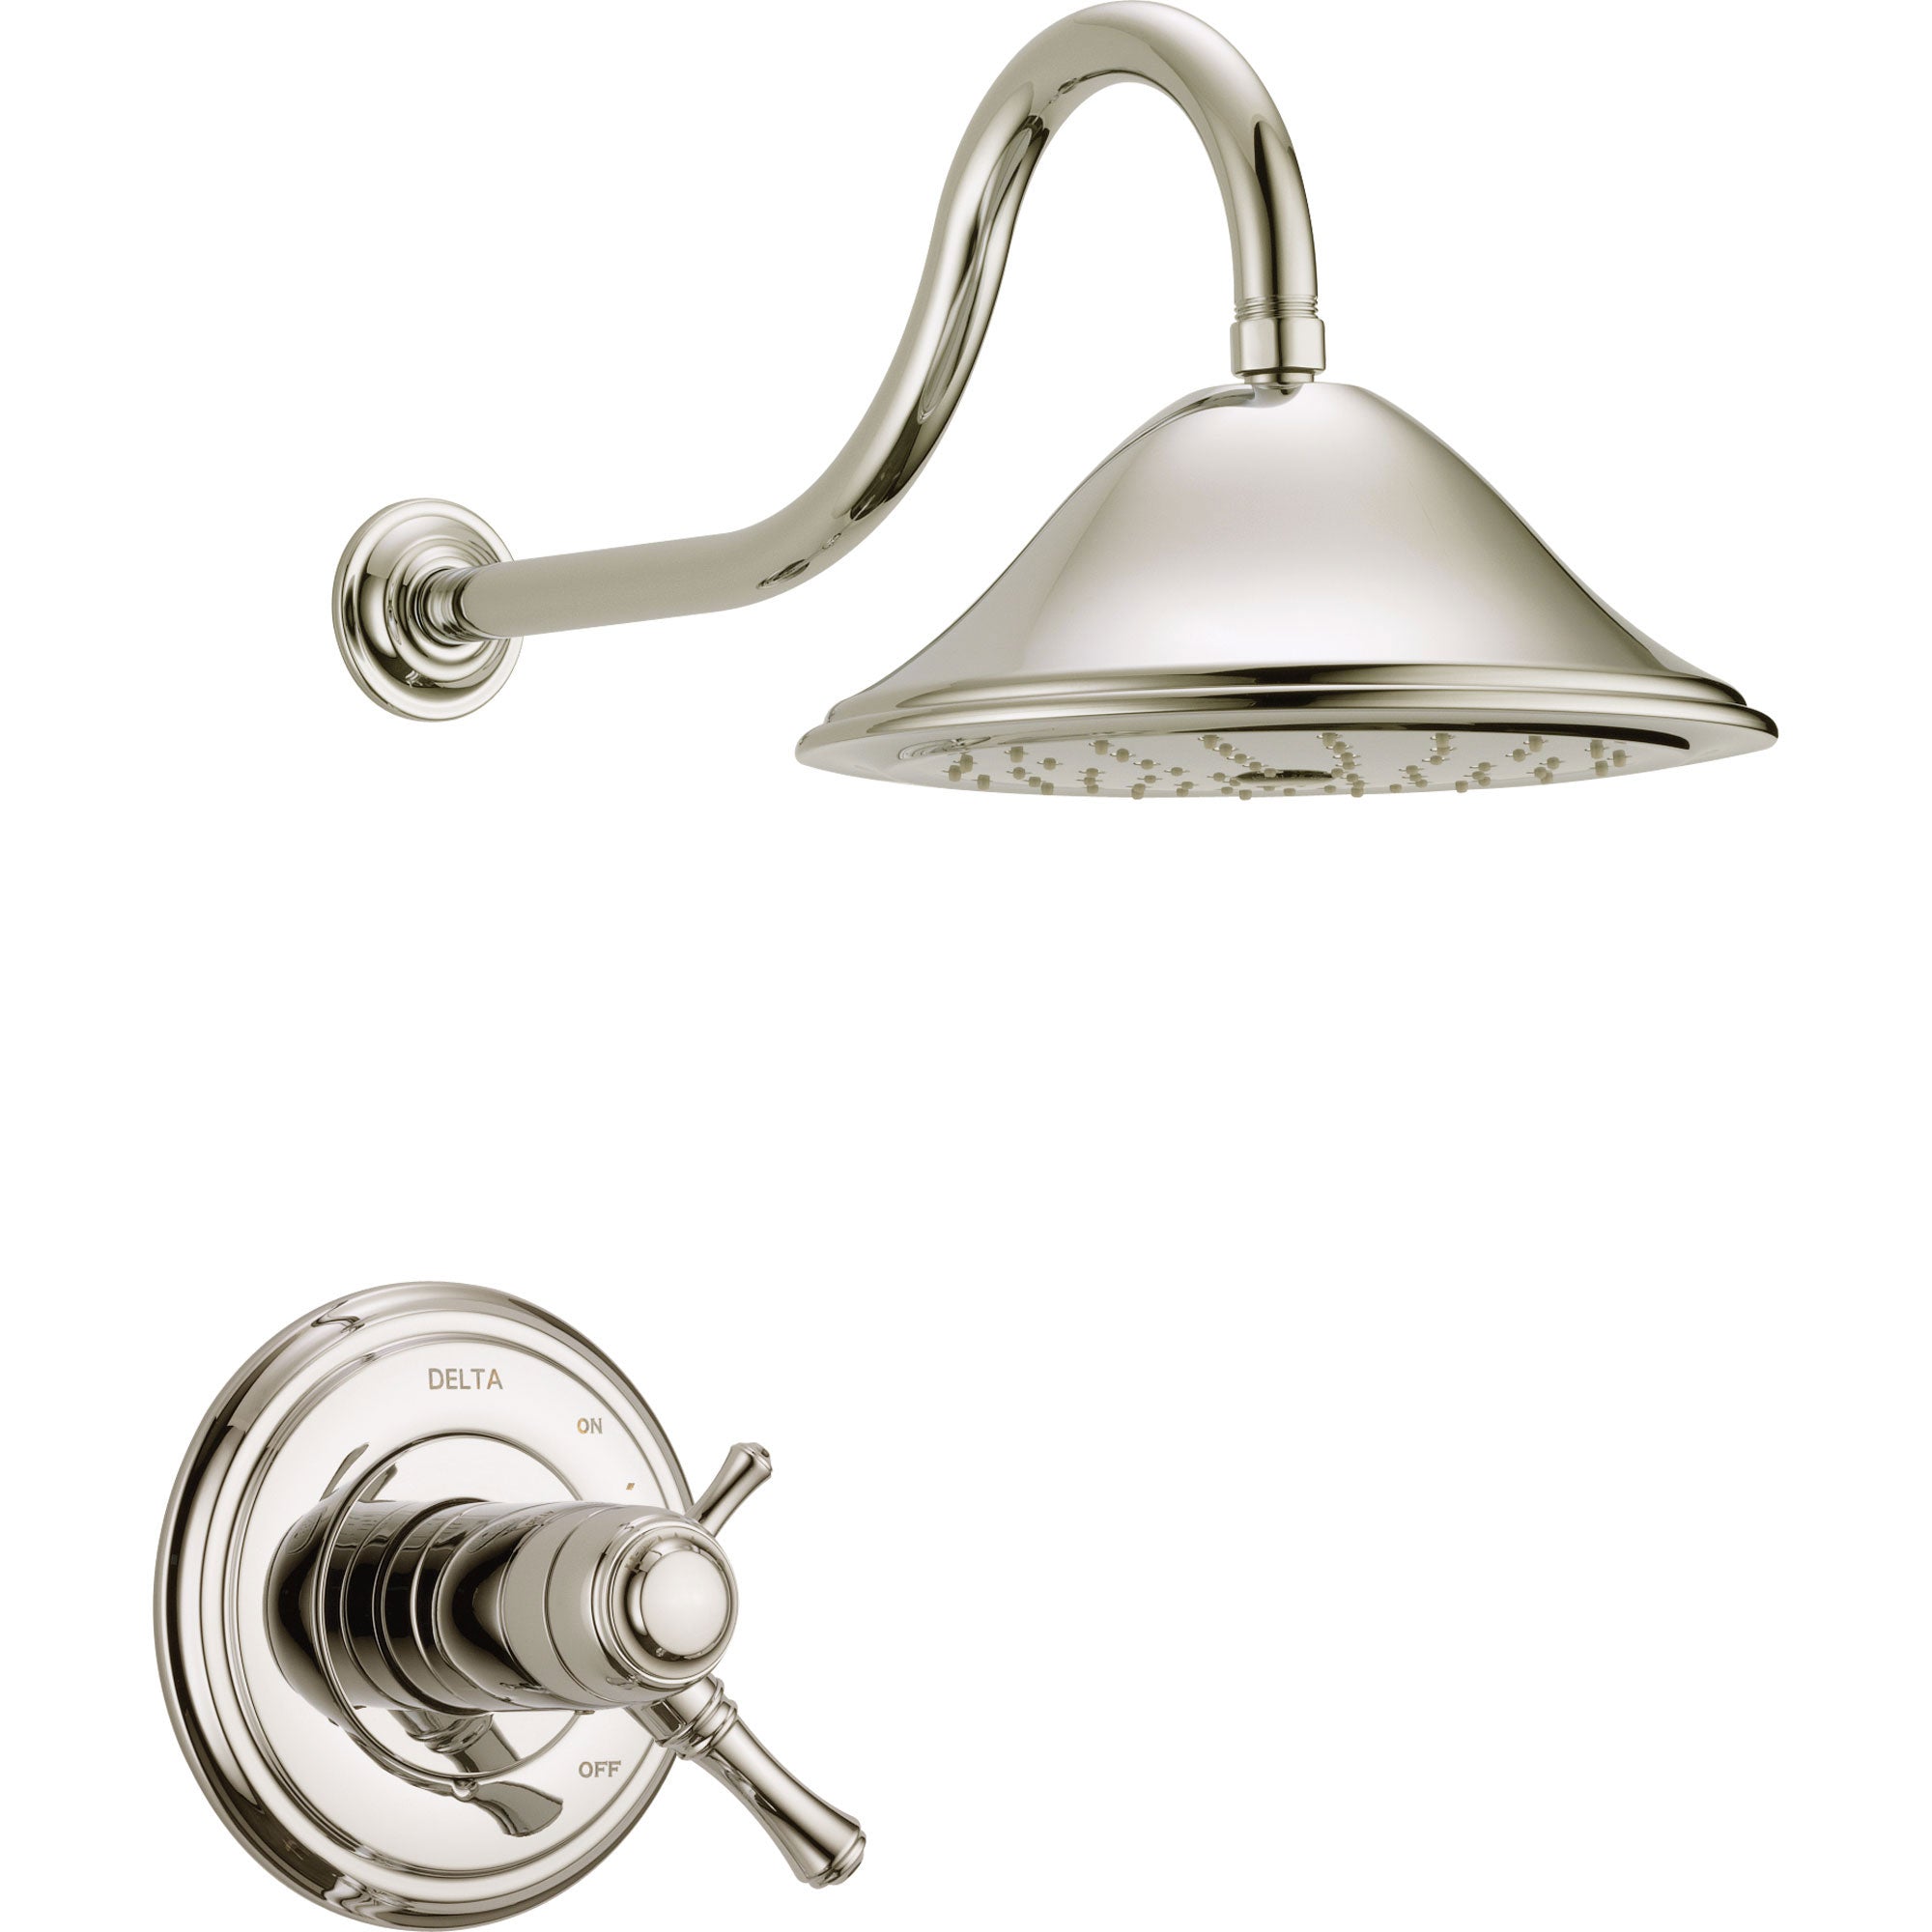 Delta Cassidy Polished Nickel Dual Thermostatic Large Shower Faucet Trim 584222